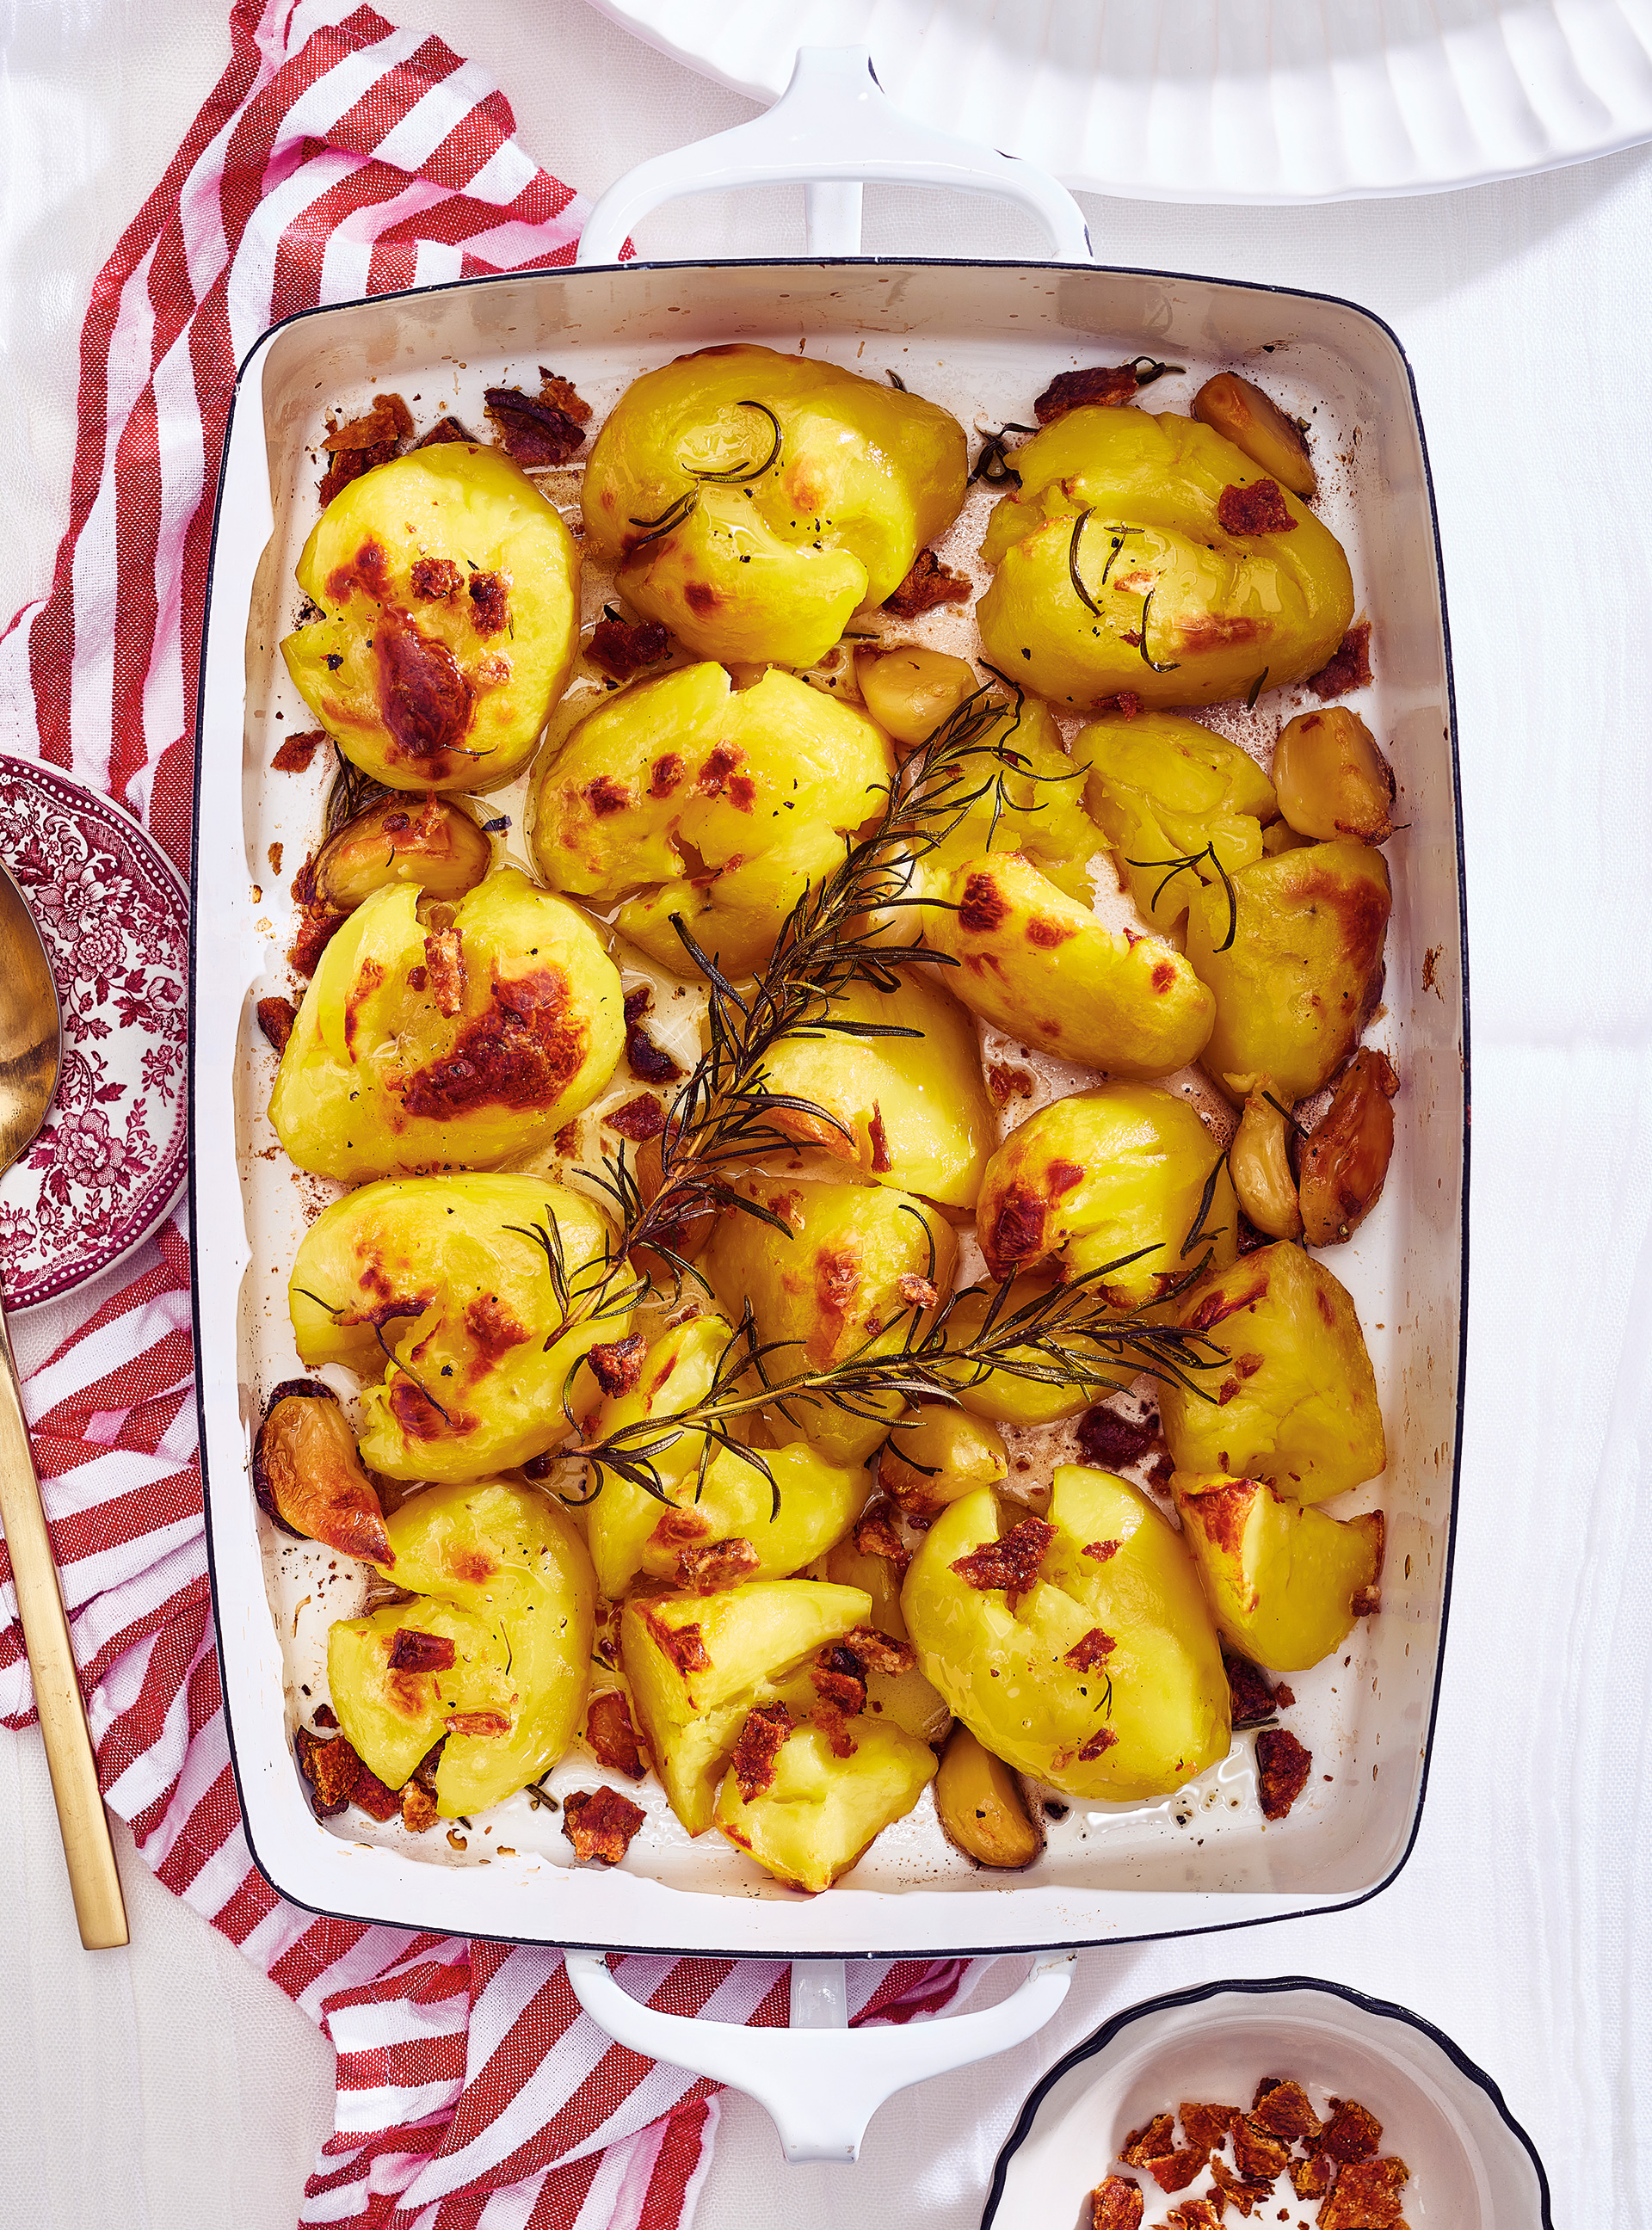 Roasted Potatoes with Confit Garlic and Rosemary